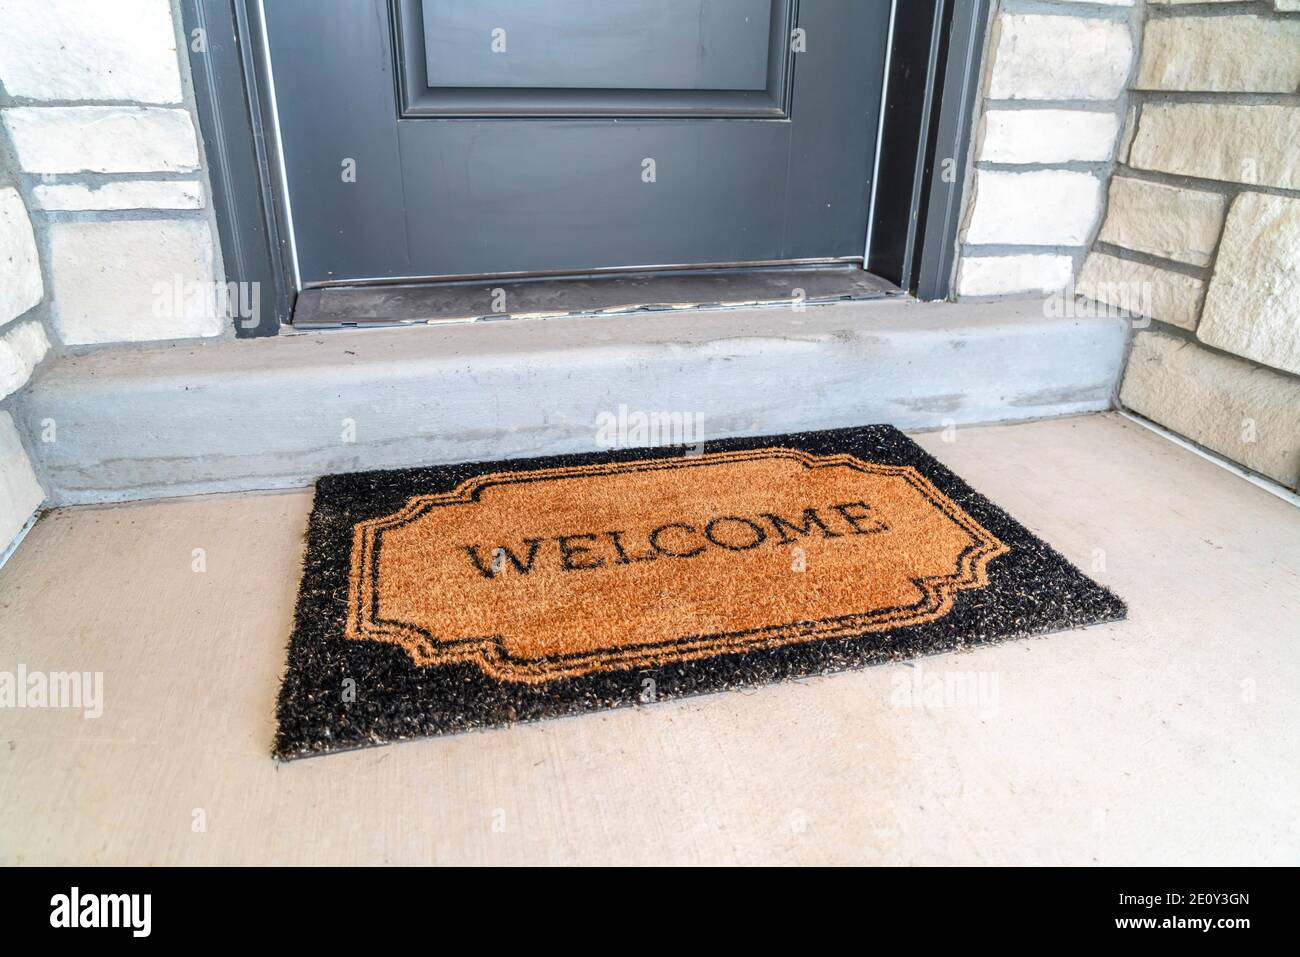 https://c8.alamy.com/comp/2E0Y3GN/welcome-doormat-placed-in-front-of-the-gray-front-door-of-a-home-entrance-2E0Y3GN.jpg